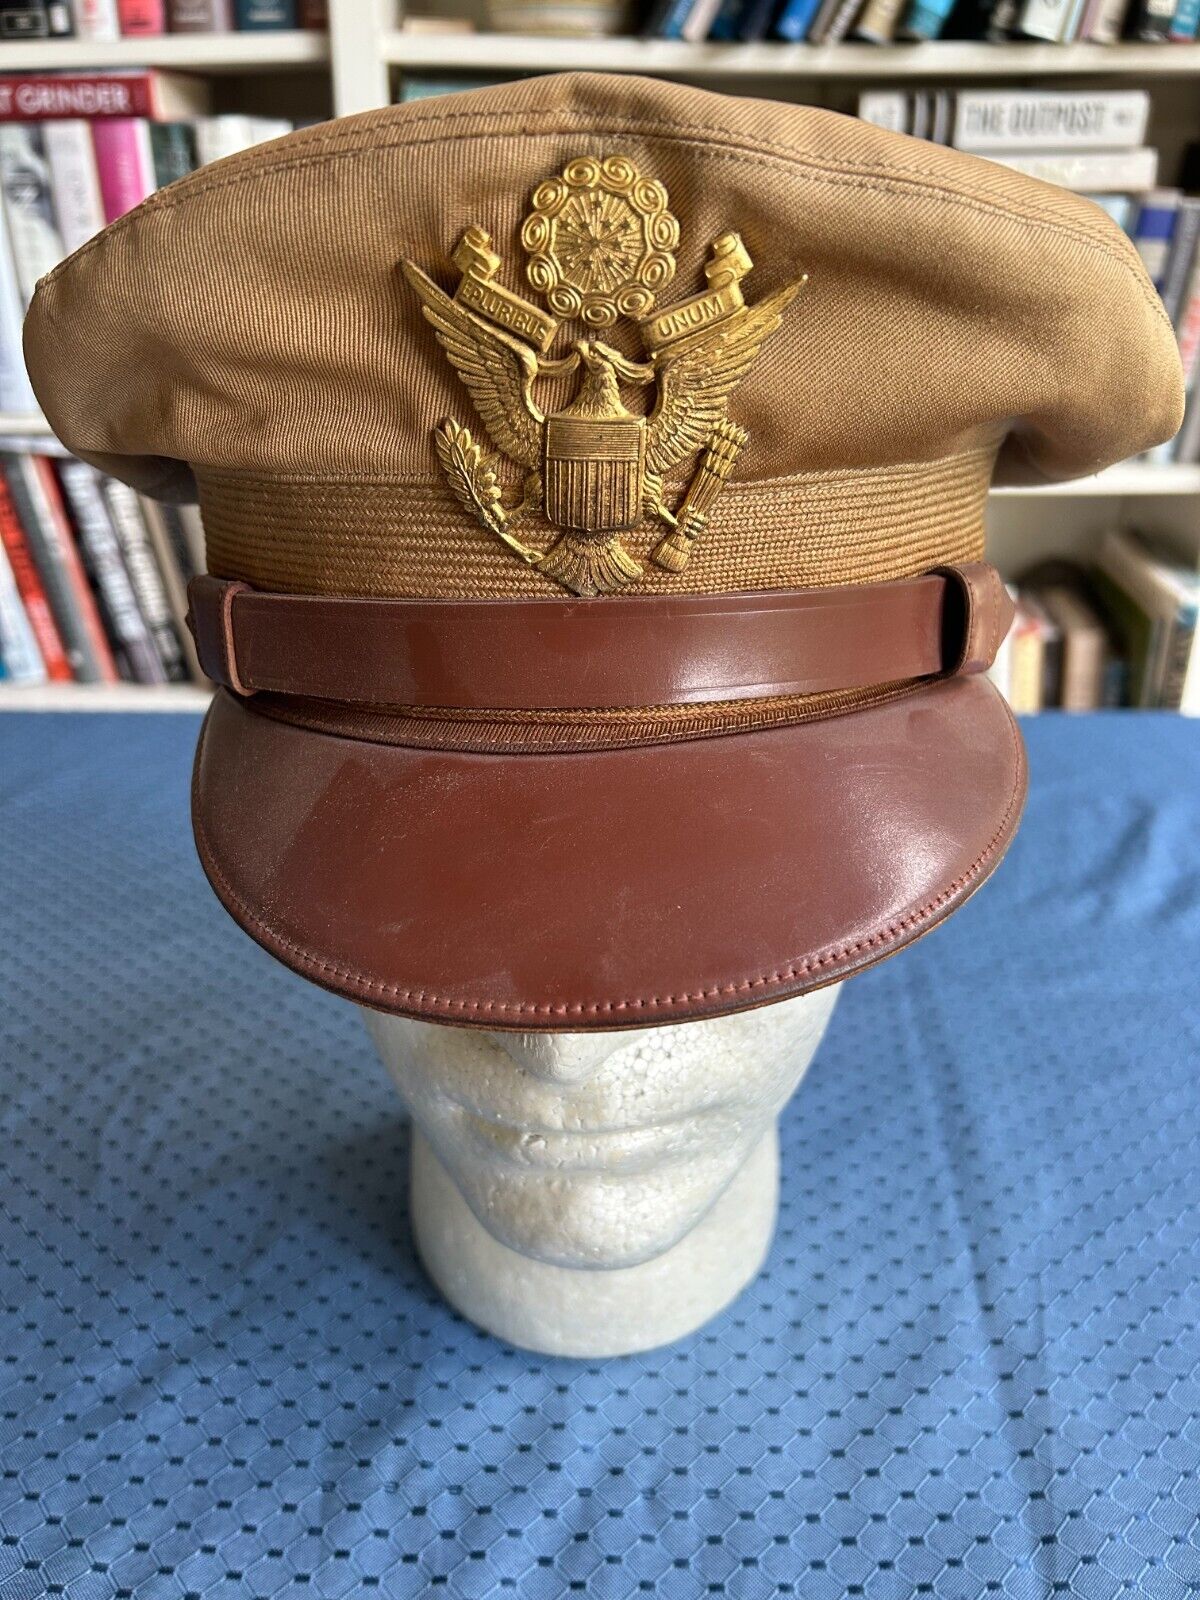 United States Army Air Force Service Cap PreWWII-WWII